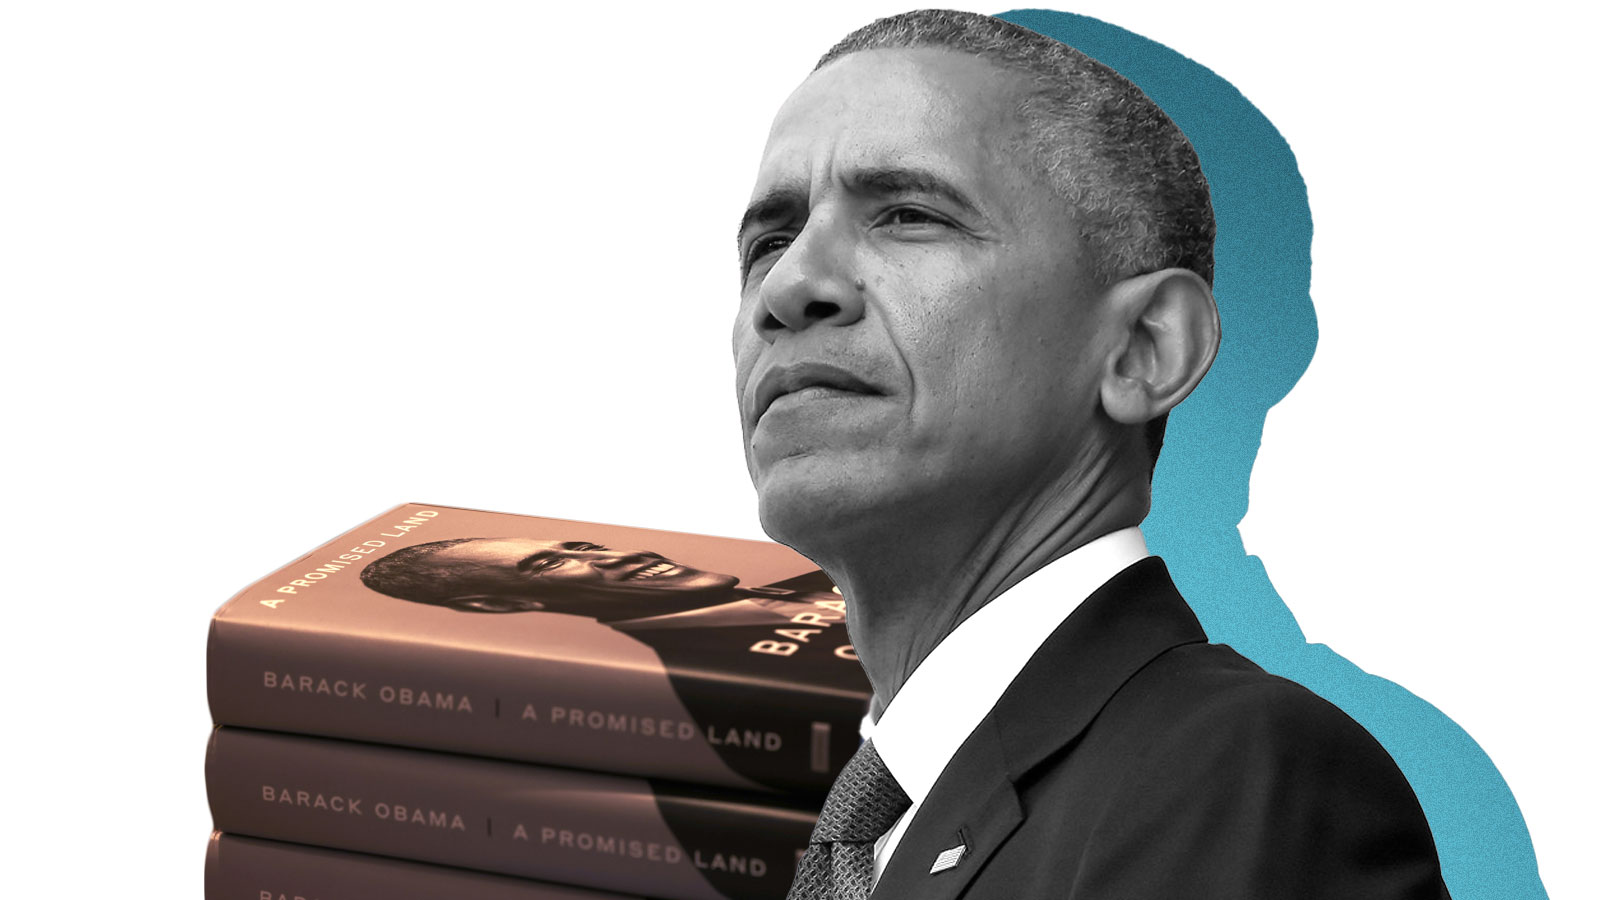 A collage of Barack Obama with a blue shadow and a stack of his books behind him.